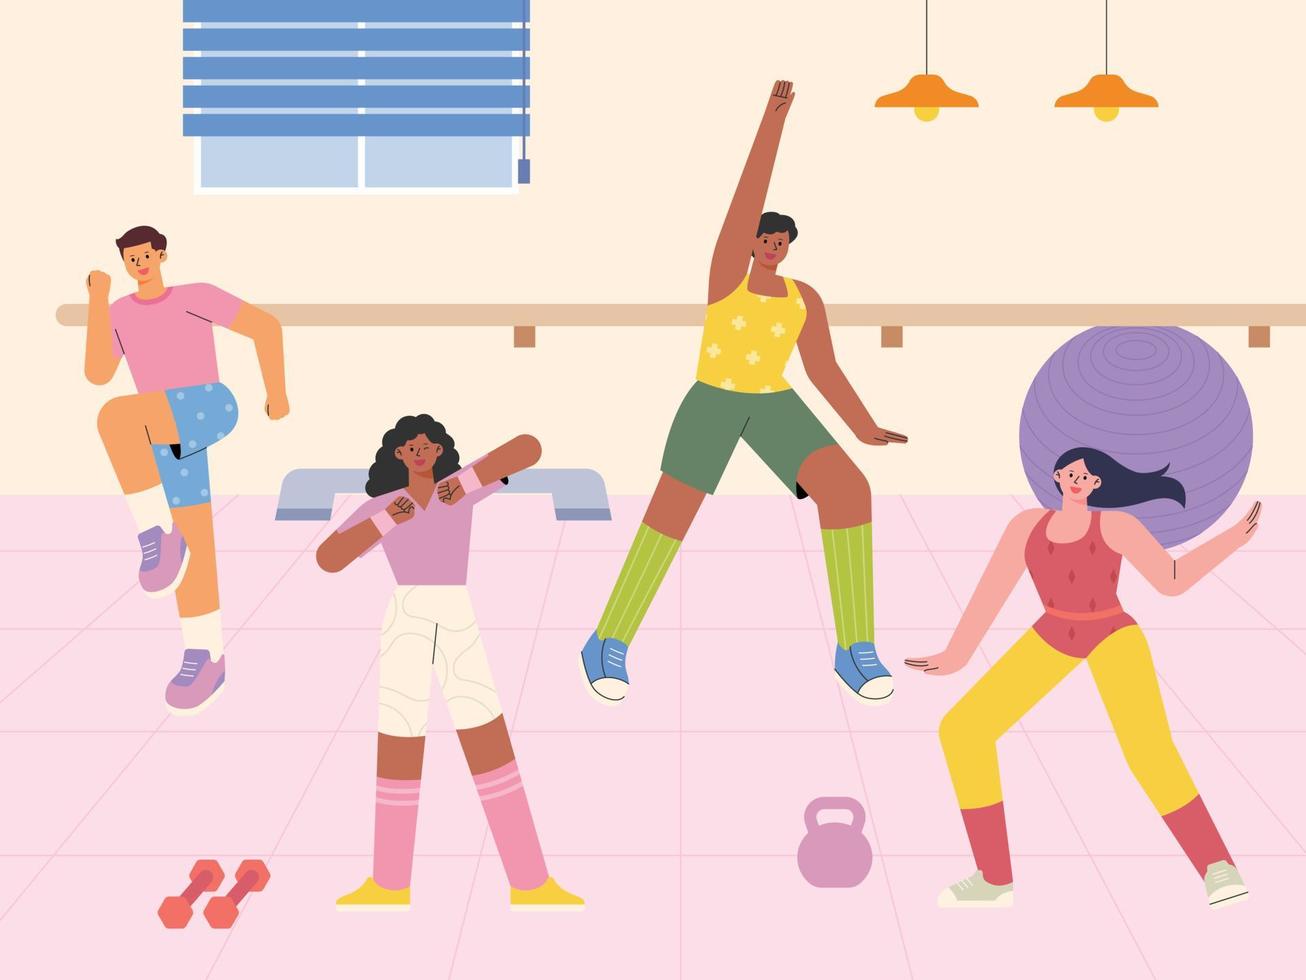 People are doing aerobics together in the gym. flat design style vector illustration.